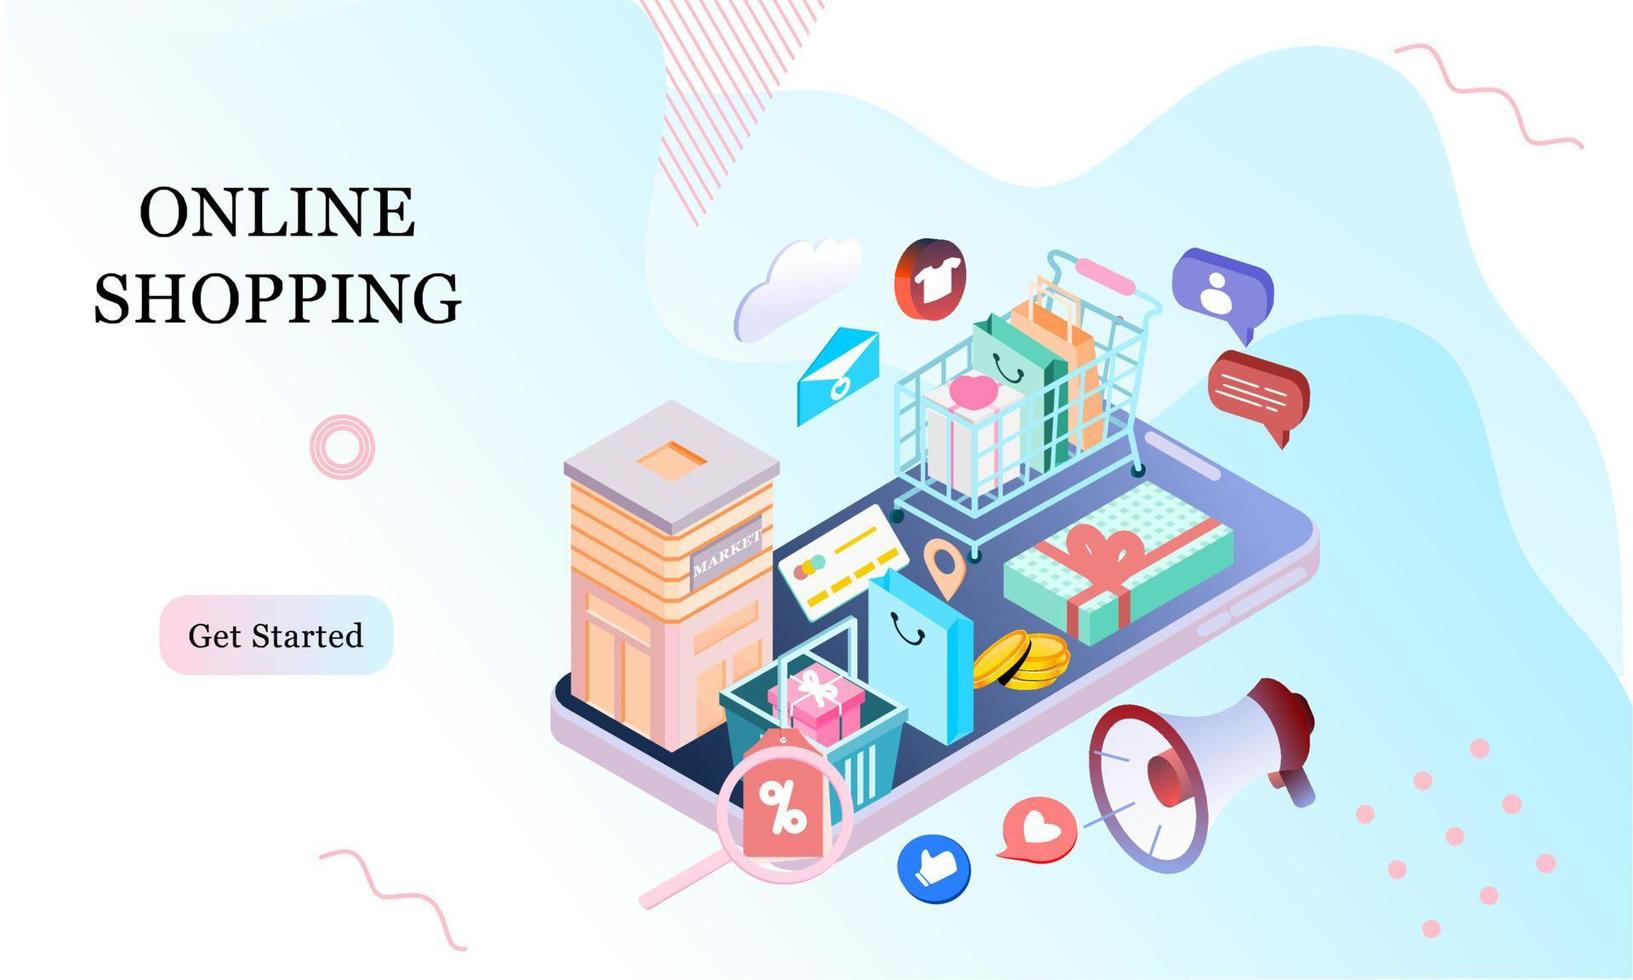 Landing page of 3d isometric online shopping on websites or mobile applications concepts of vector e-commerce and digital marketing. Memphis style illustration for banner online store promotion.